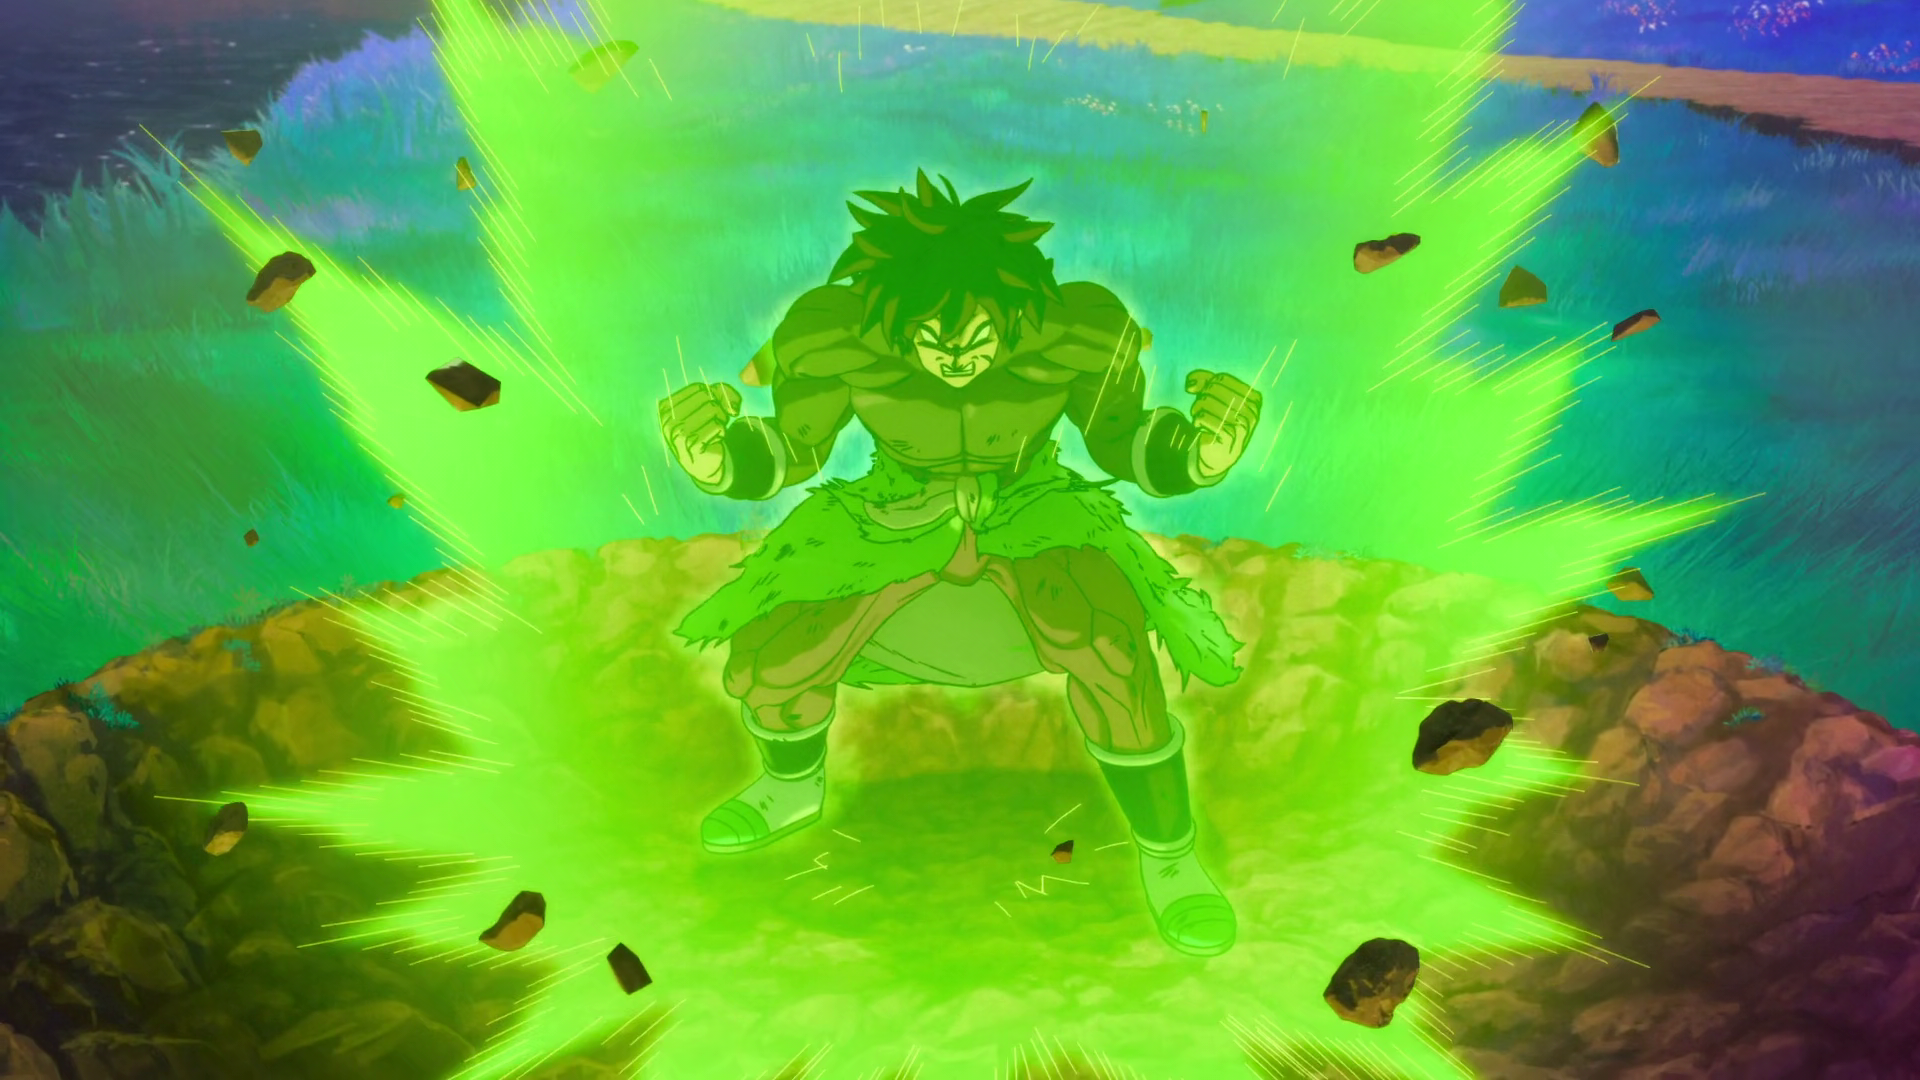 Dragon Ball: The Breakers Gameplay is Wilder Than You Think!